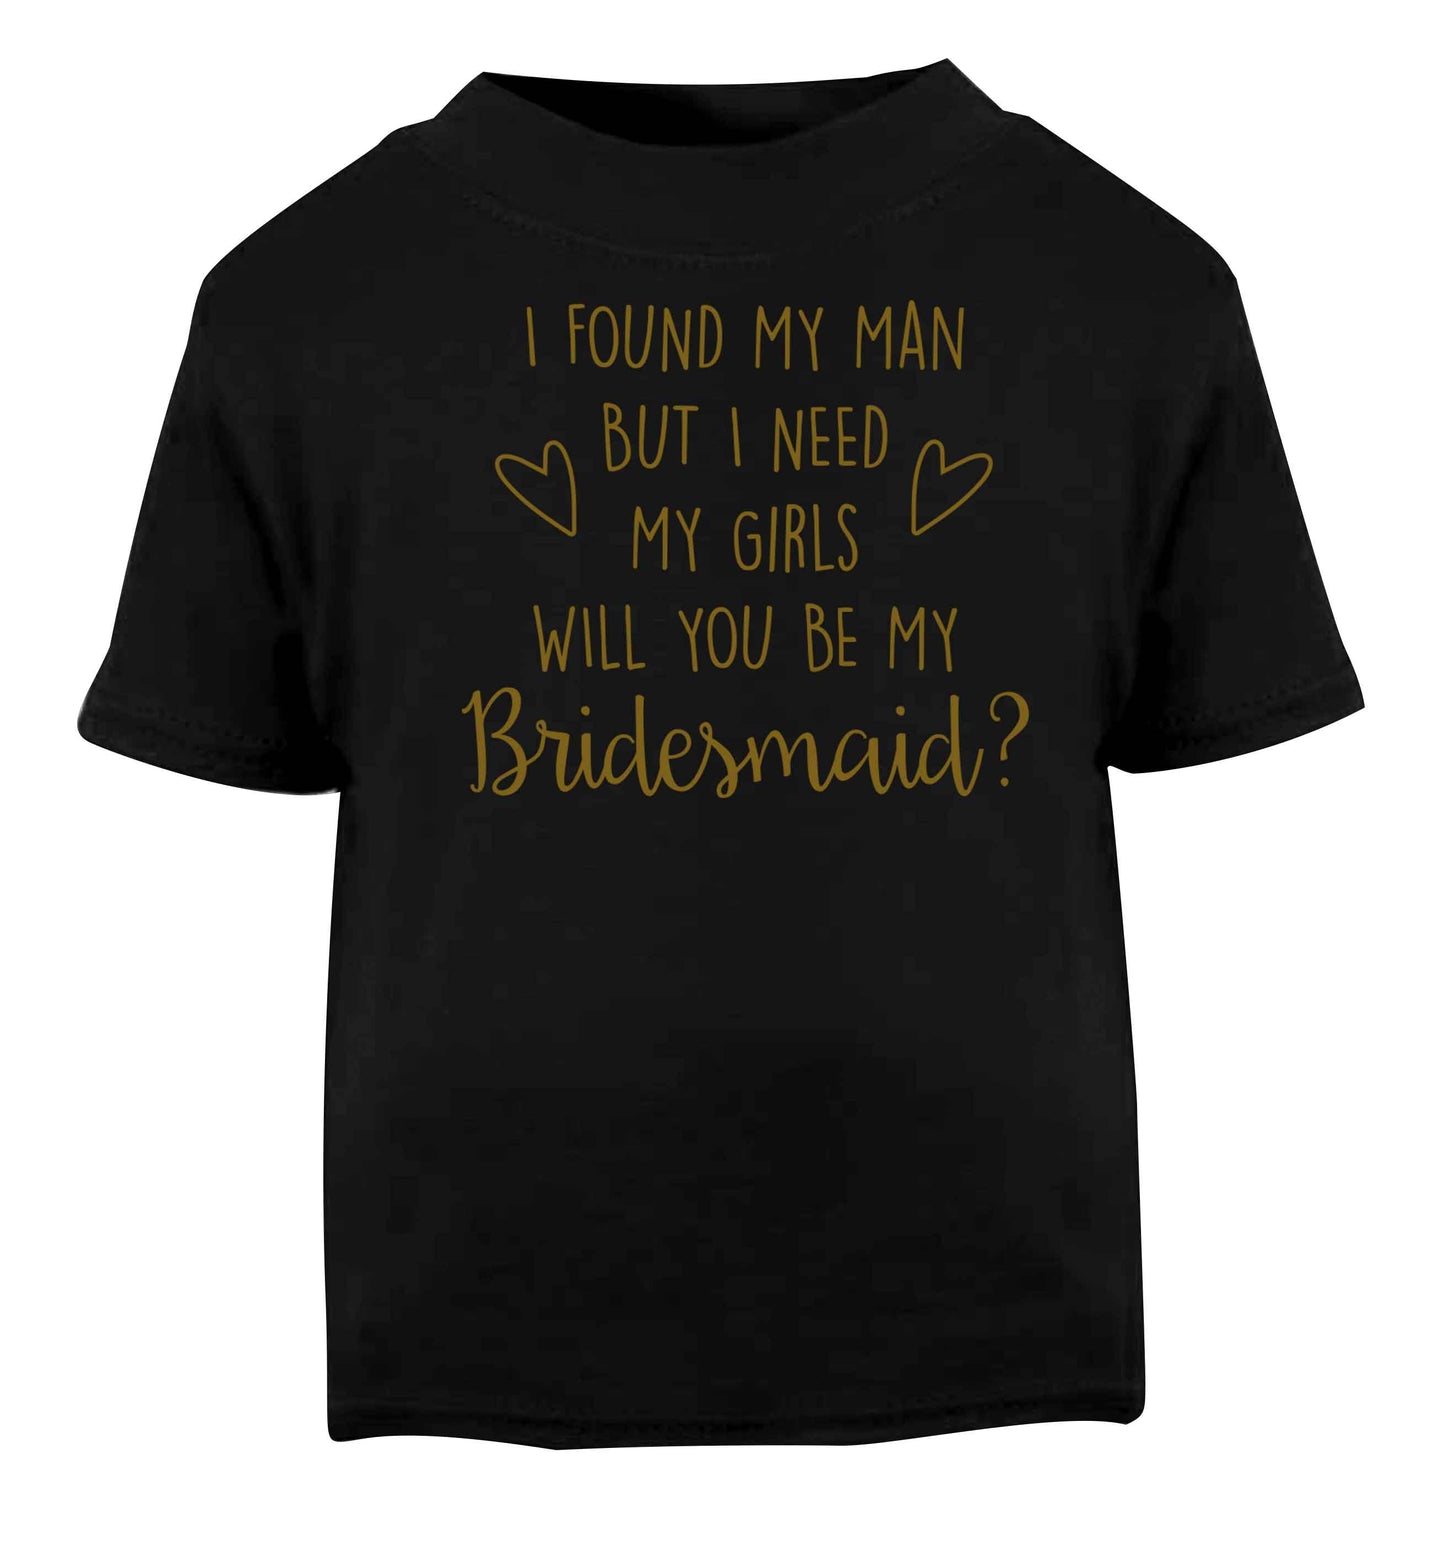 I found my man but I need my girls will you be my bridesmaid? Black baby toddler Tshirt 2 years